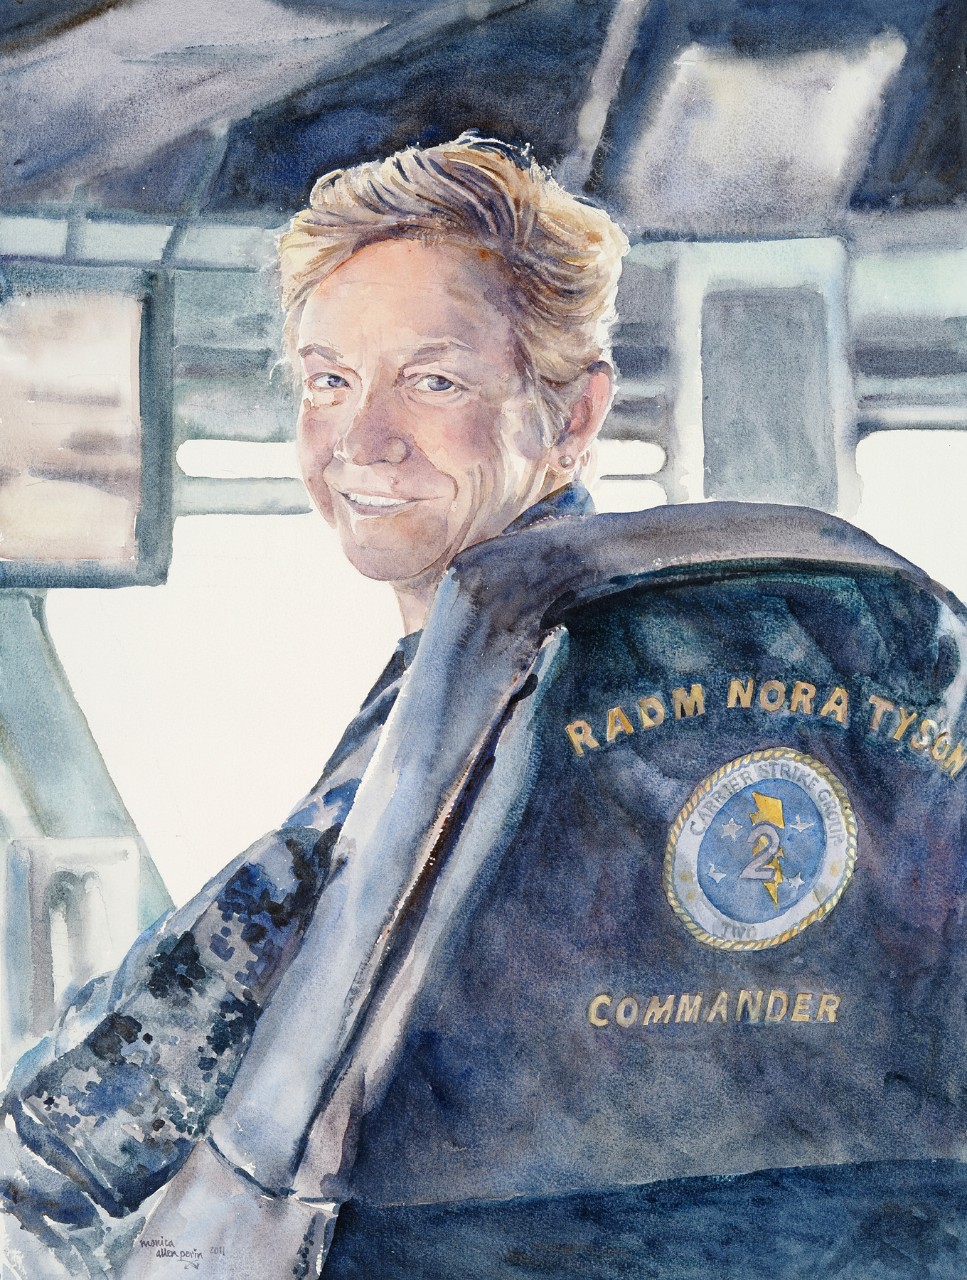 Nora Tyson sits in the commander’s chair on the bridge